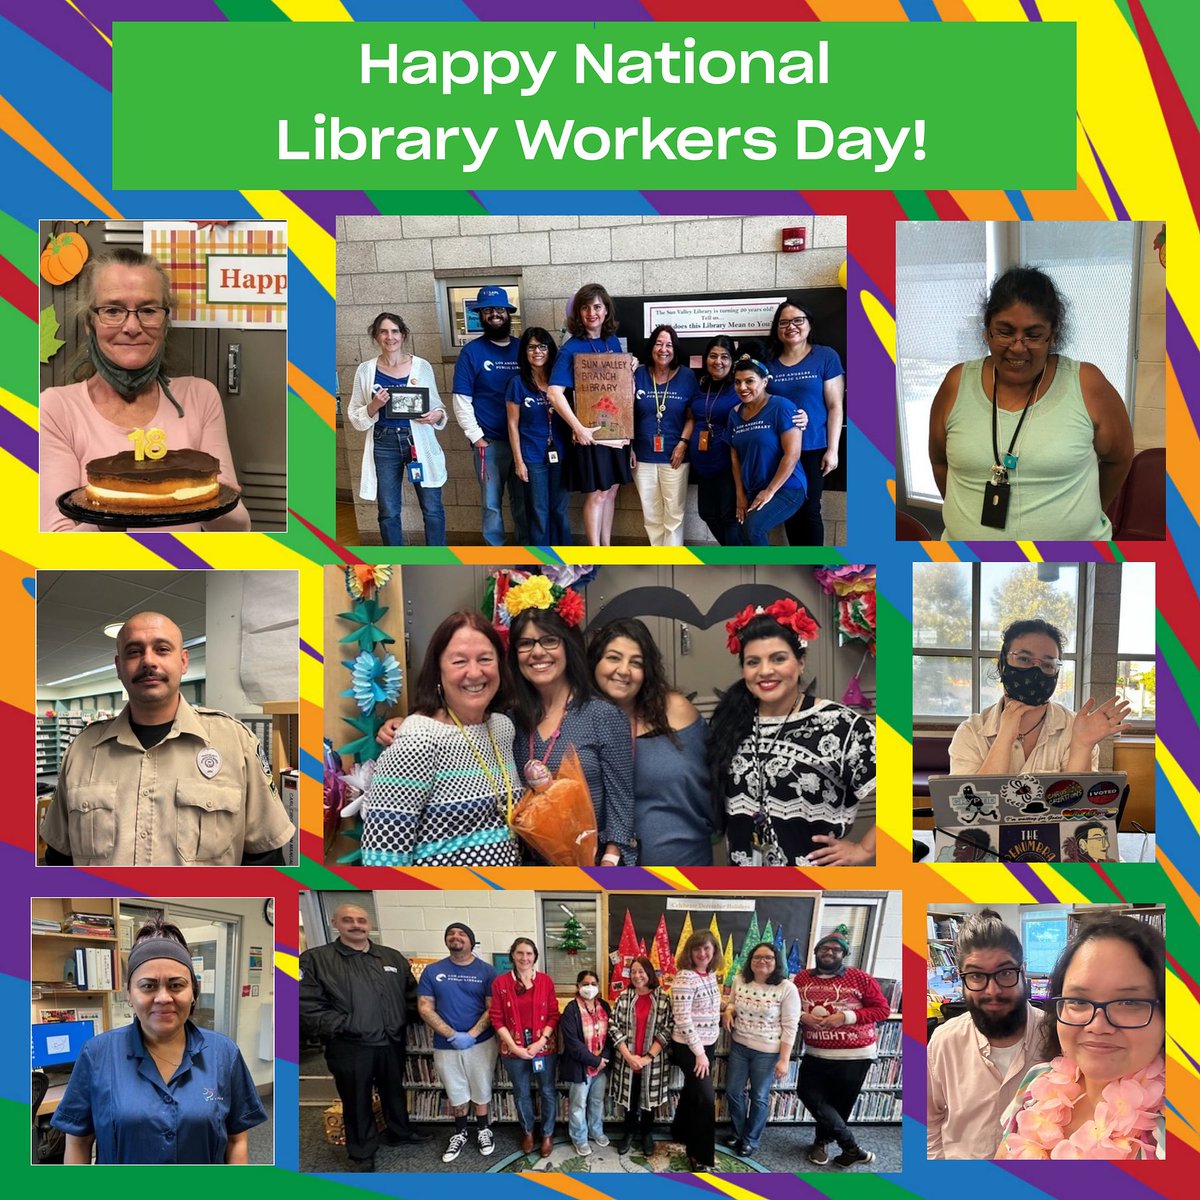 Today is #NationalLibaryWorkersDay! We want to celebrate by sharing some pics of our great staff working and having fun at the library. We hope to serve the community for many more years to come!